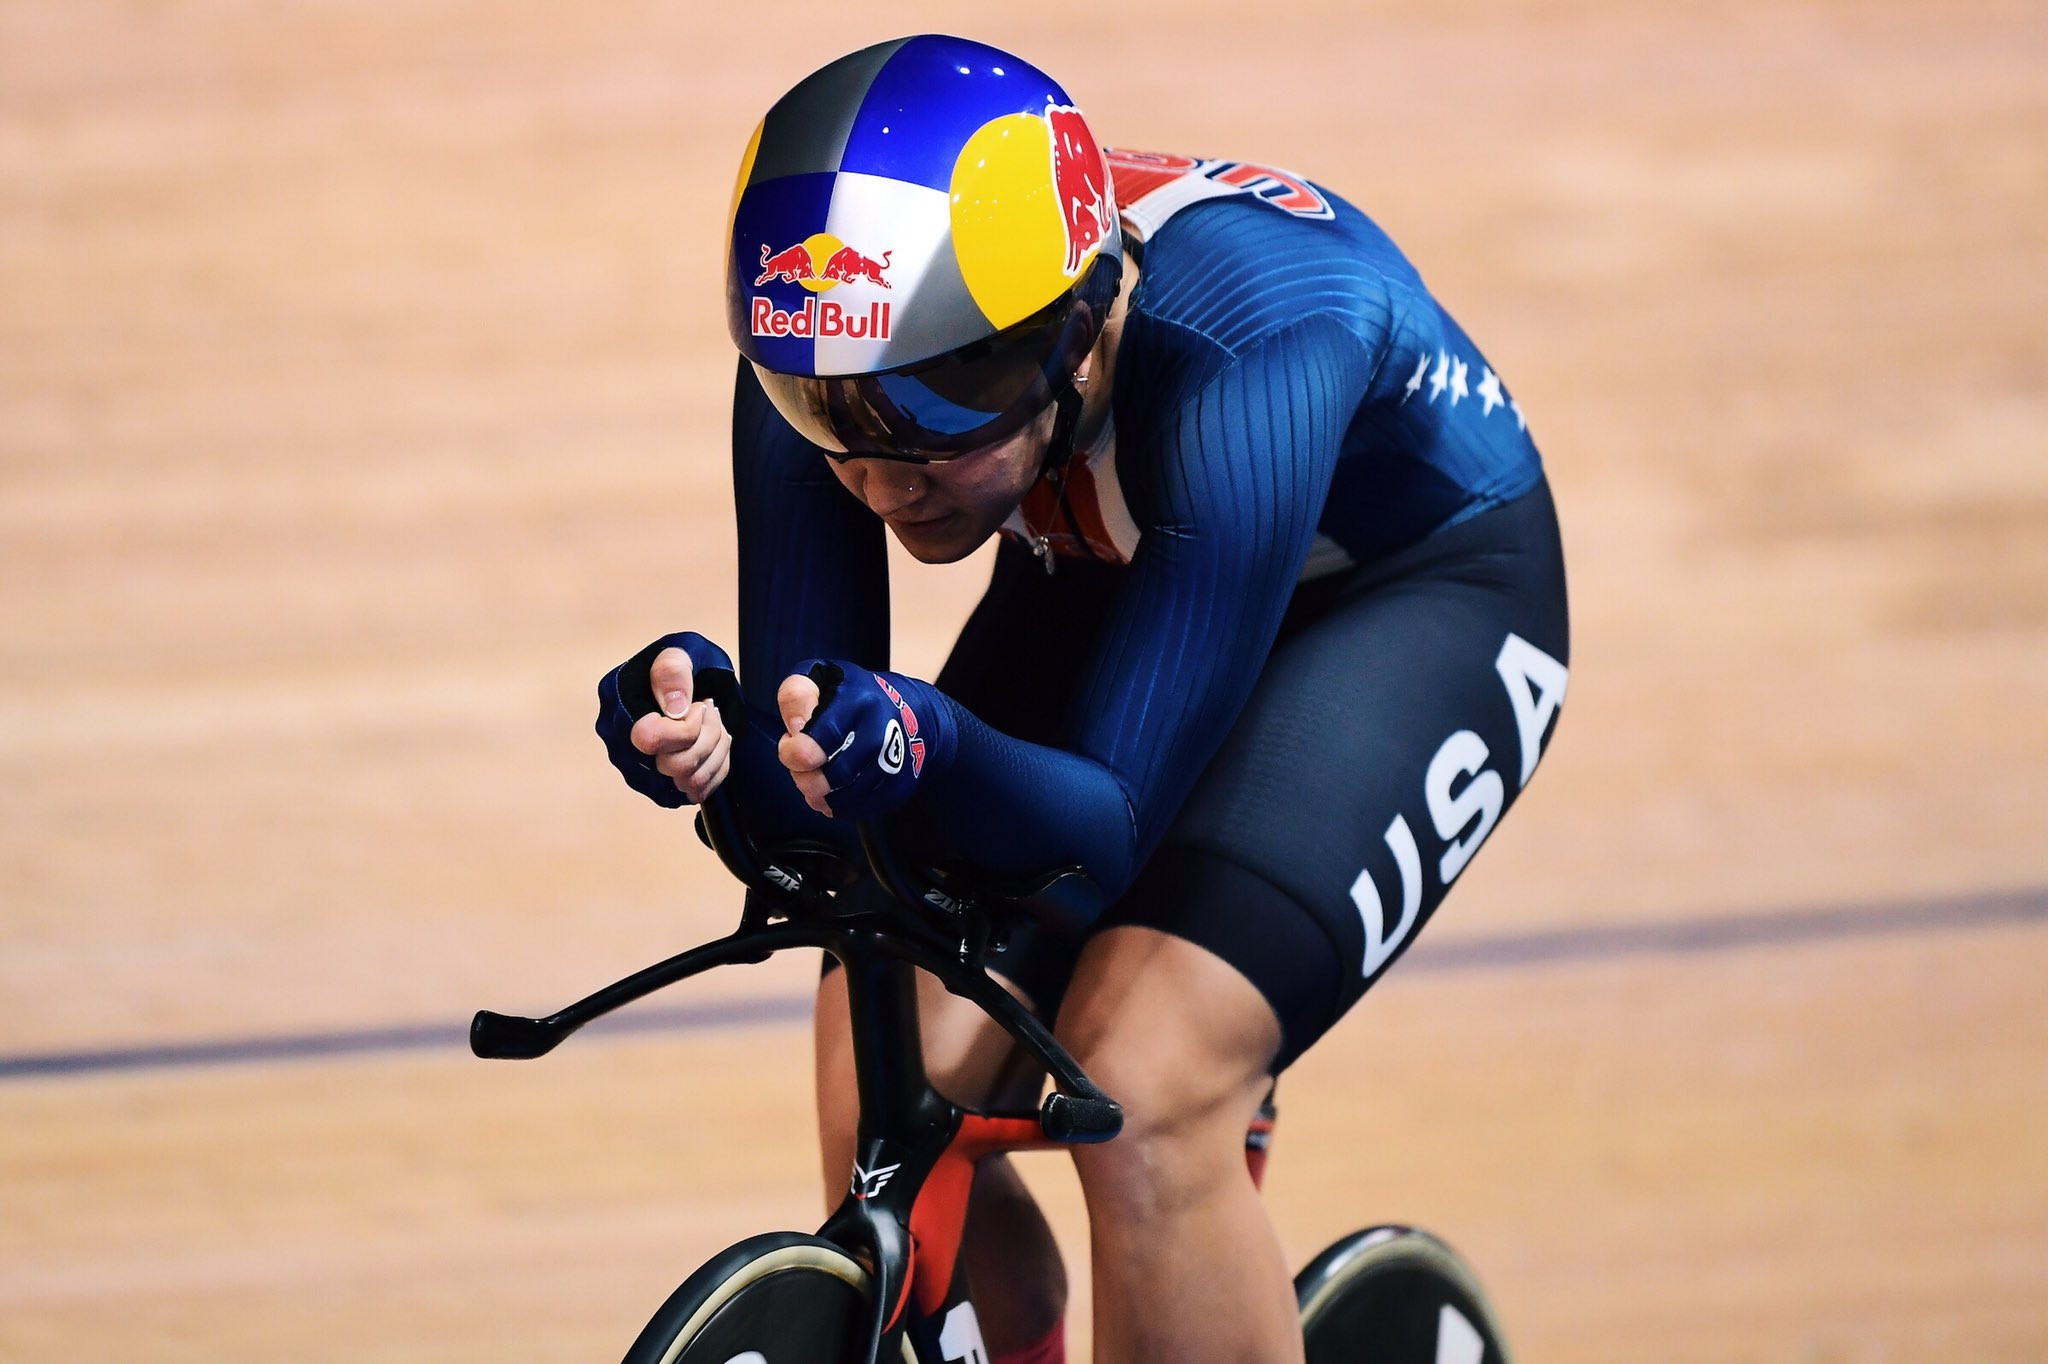 Chloe Dygert of the United States broke the world record twice on her way to taking gold in the women's individual pursuit ©UCI